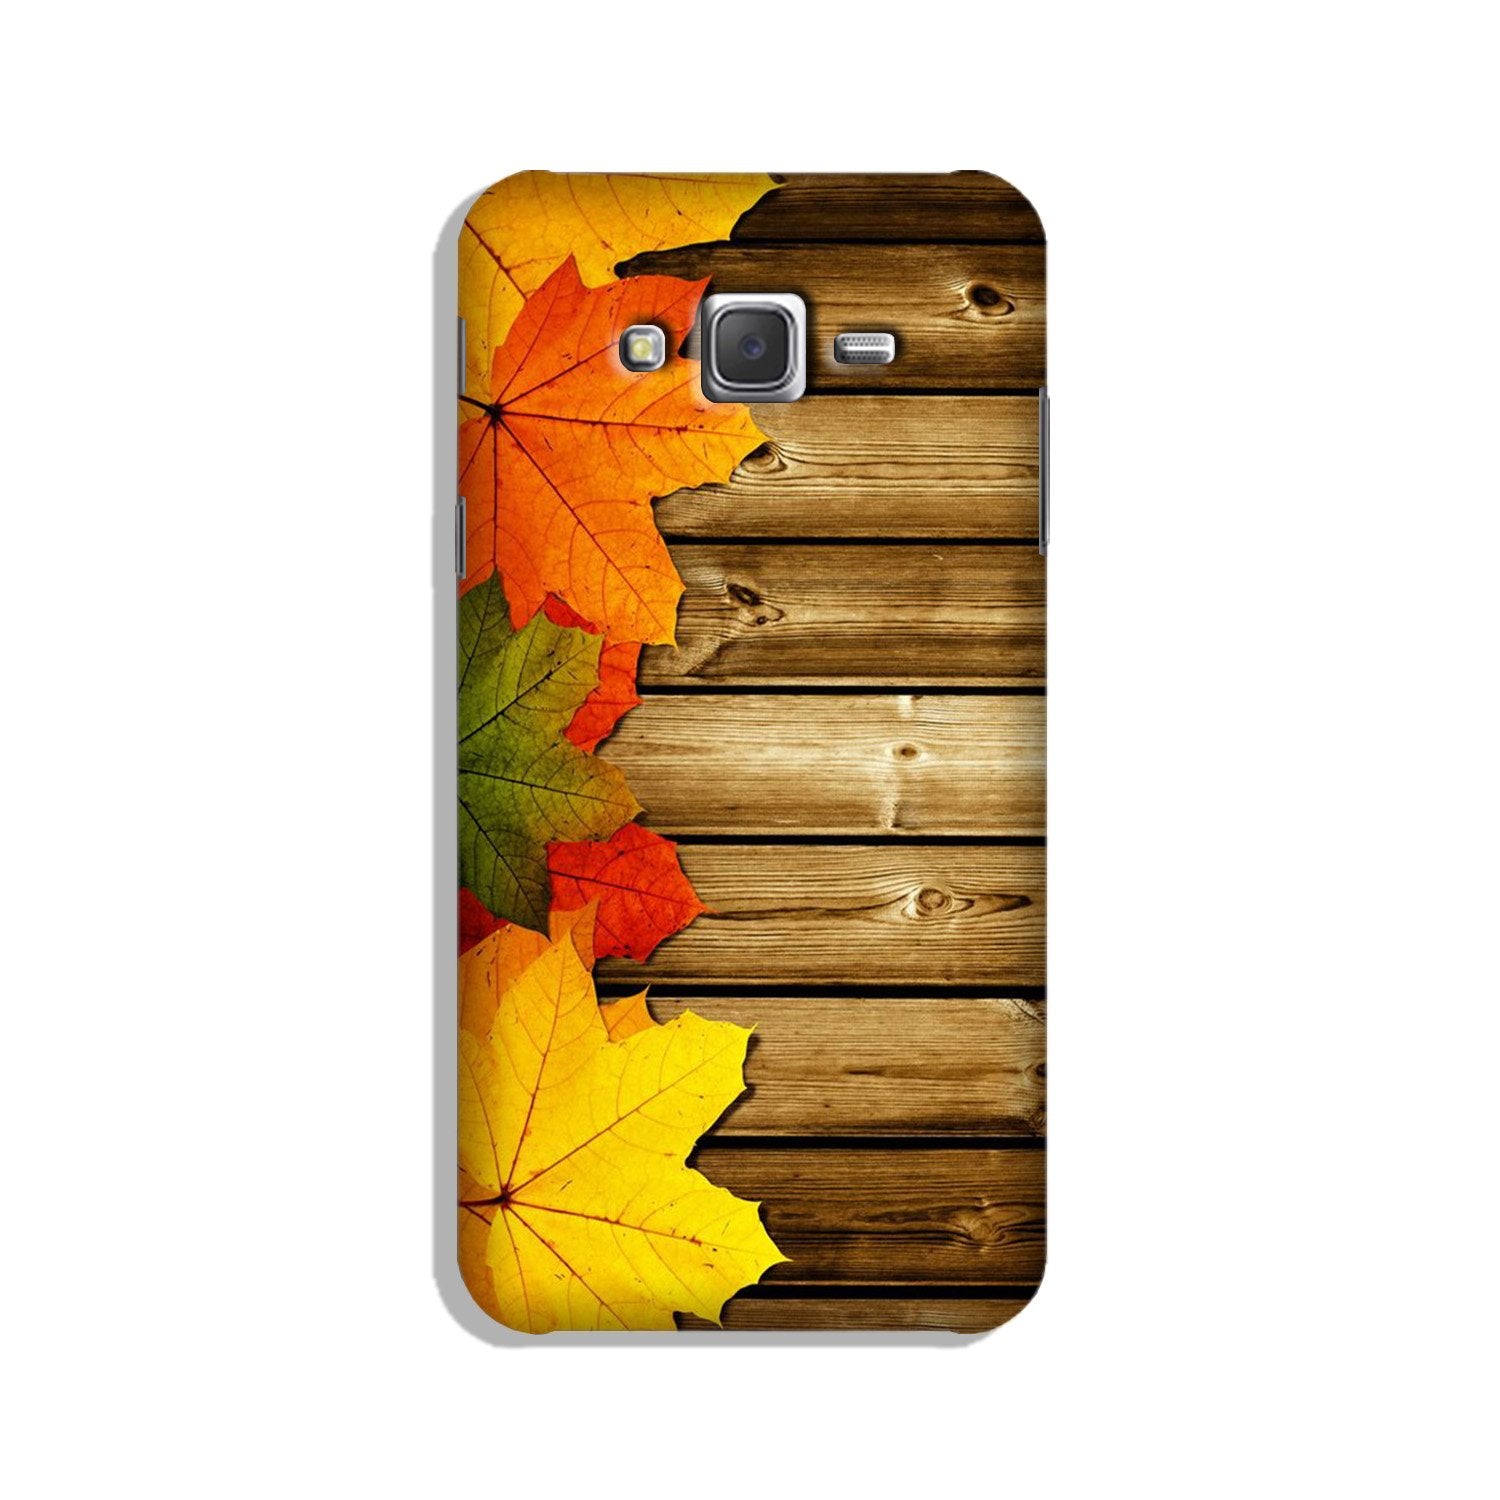 Wooden look3 Case for Galaxy J2 (2015)